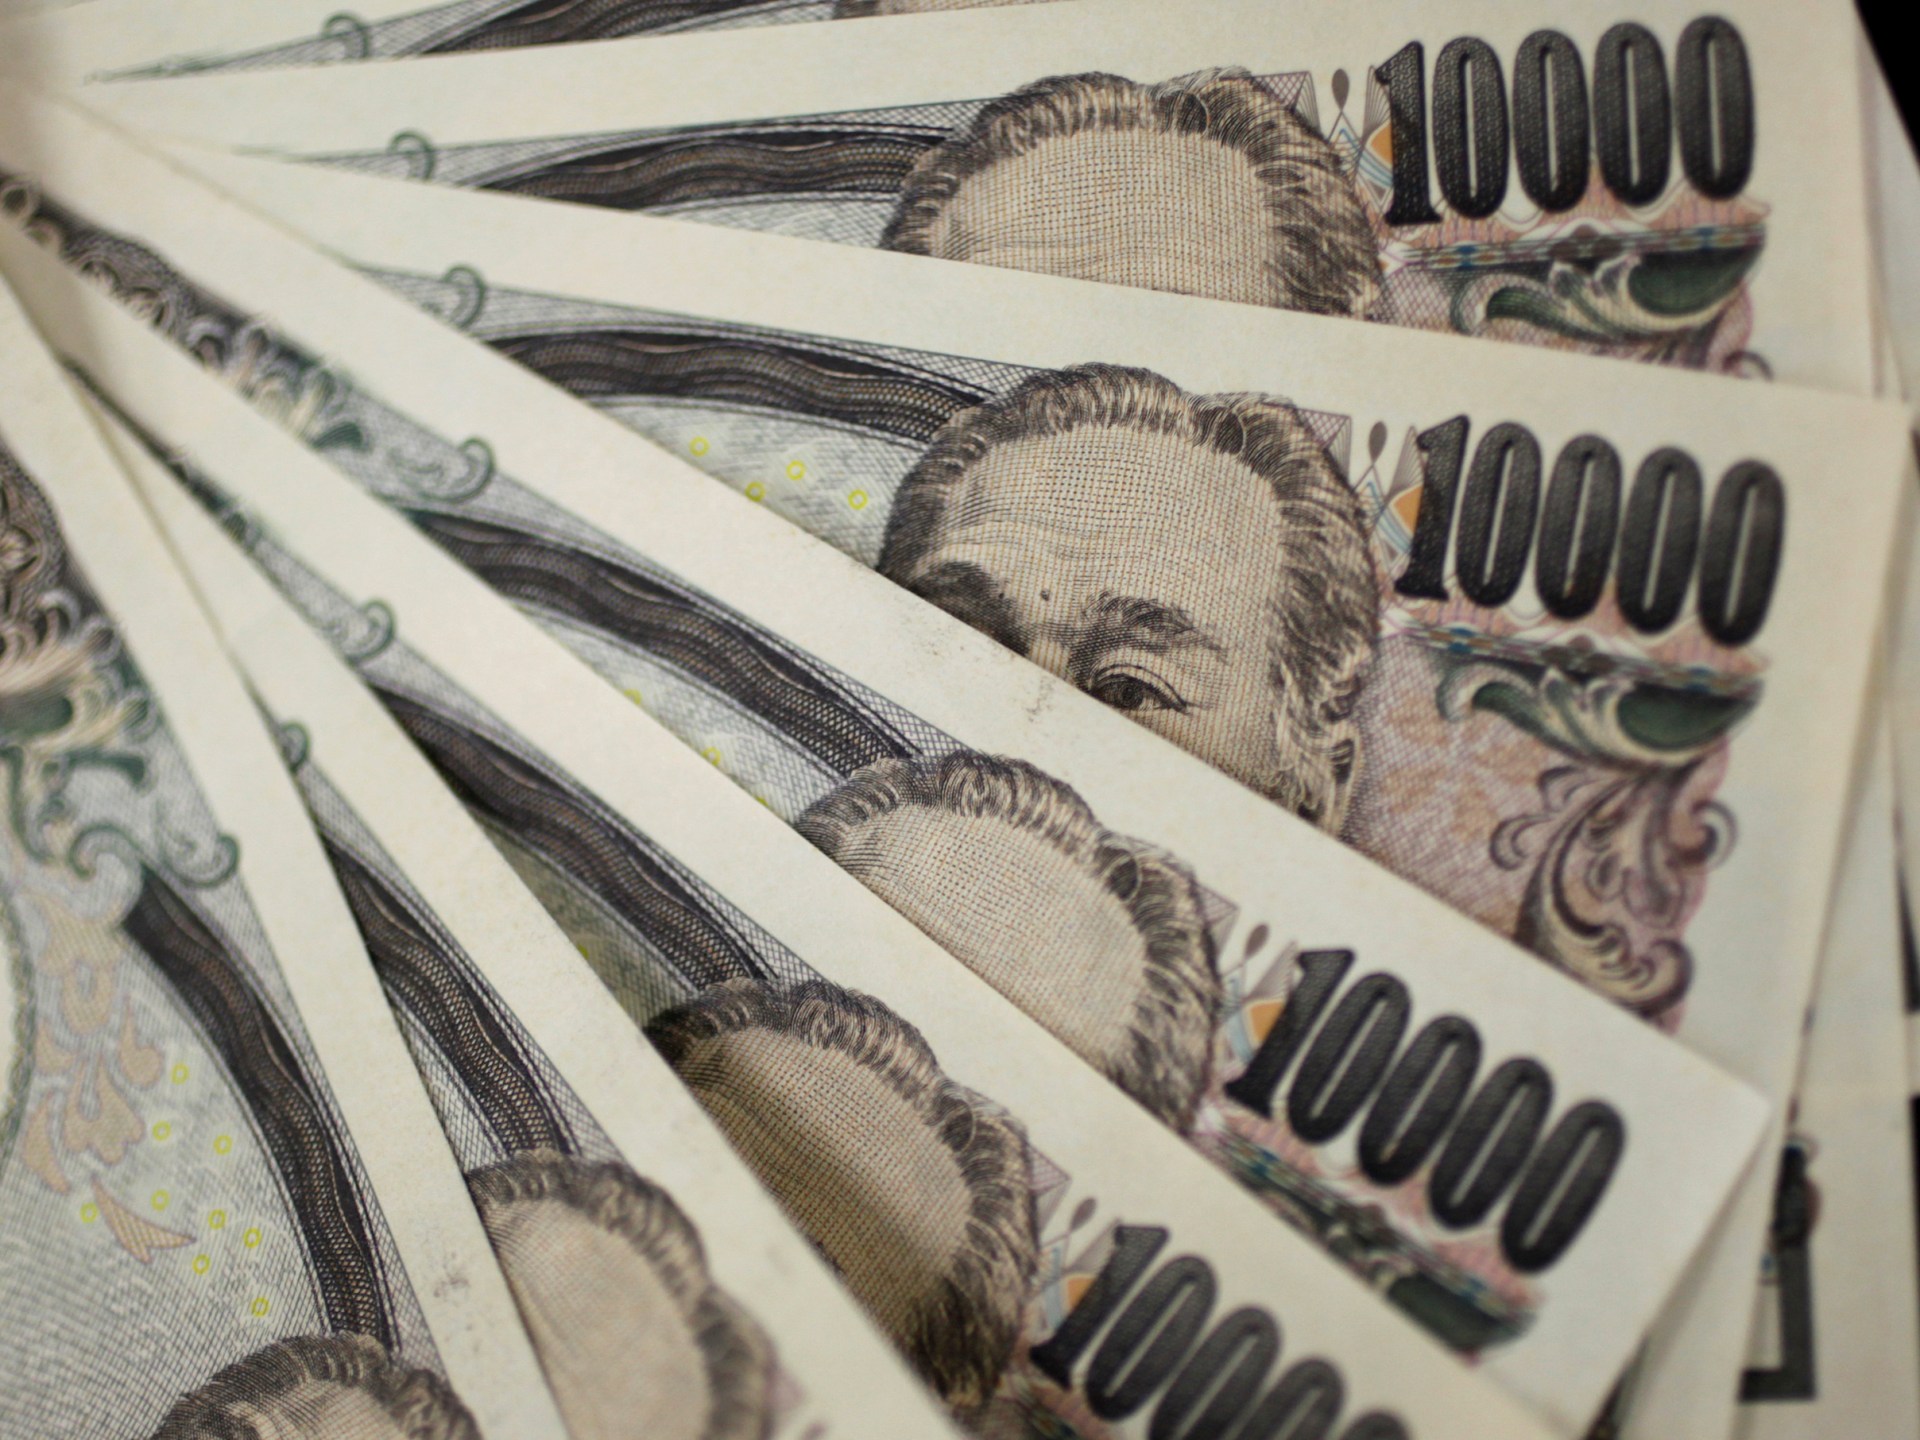 Business and Economy: Japan’s Yen Bounces Back After Reaching Lowest Level Against Dollar in 30 Years